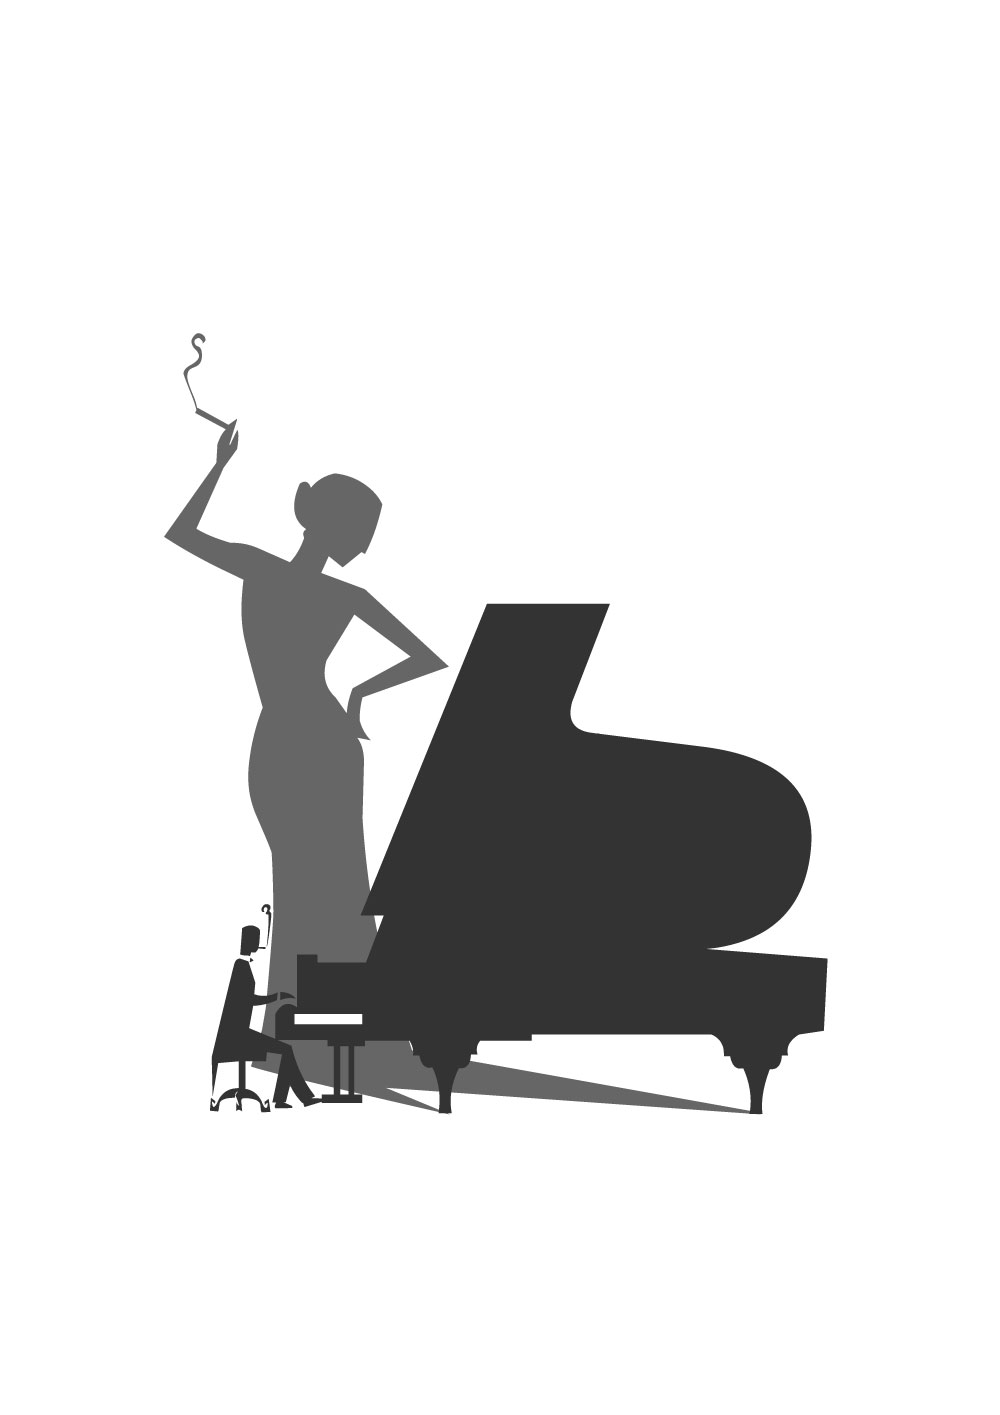 Shilouette of a man playing piano meanwhile a woman smokes in the background- modern lifestyle